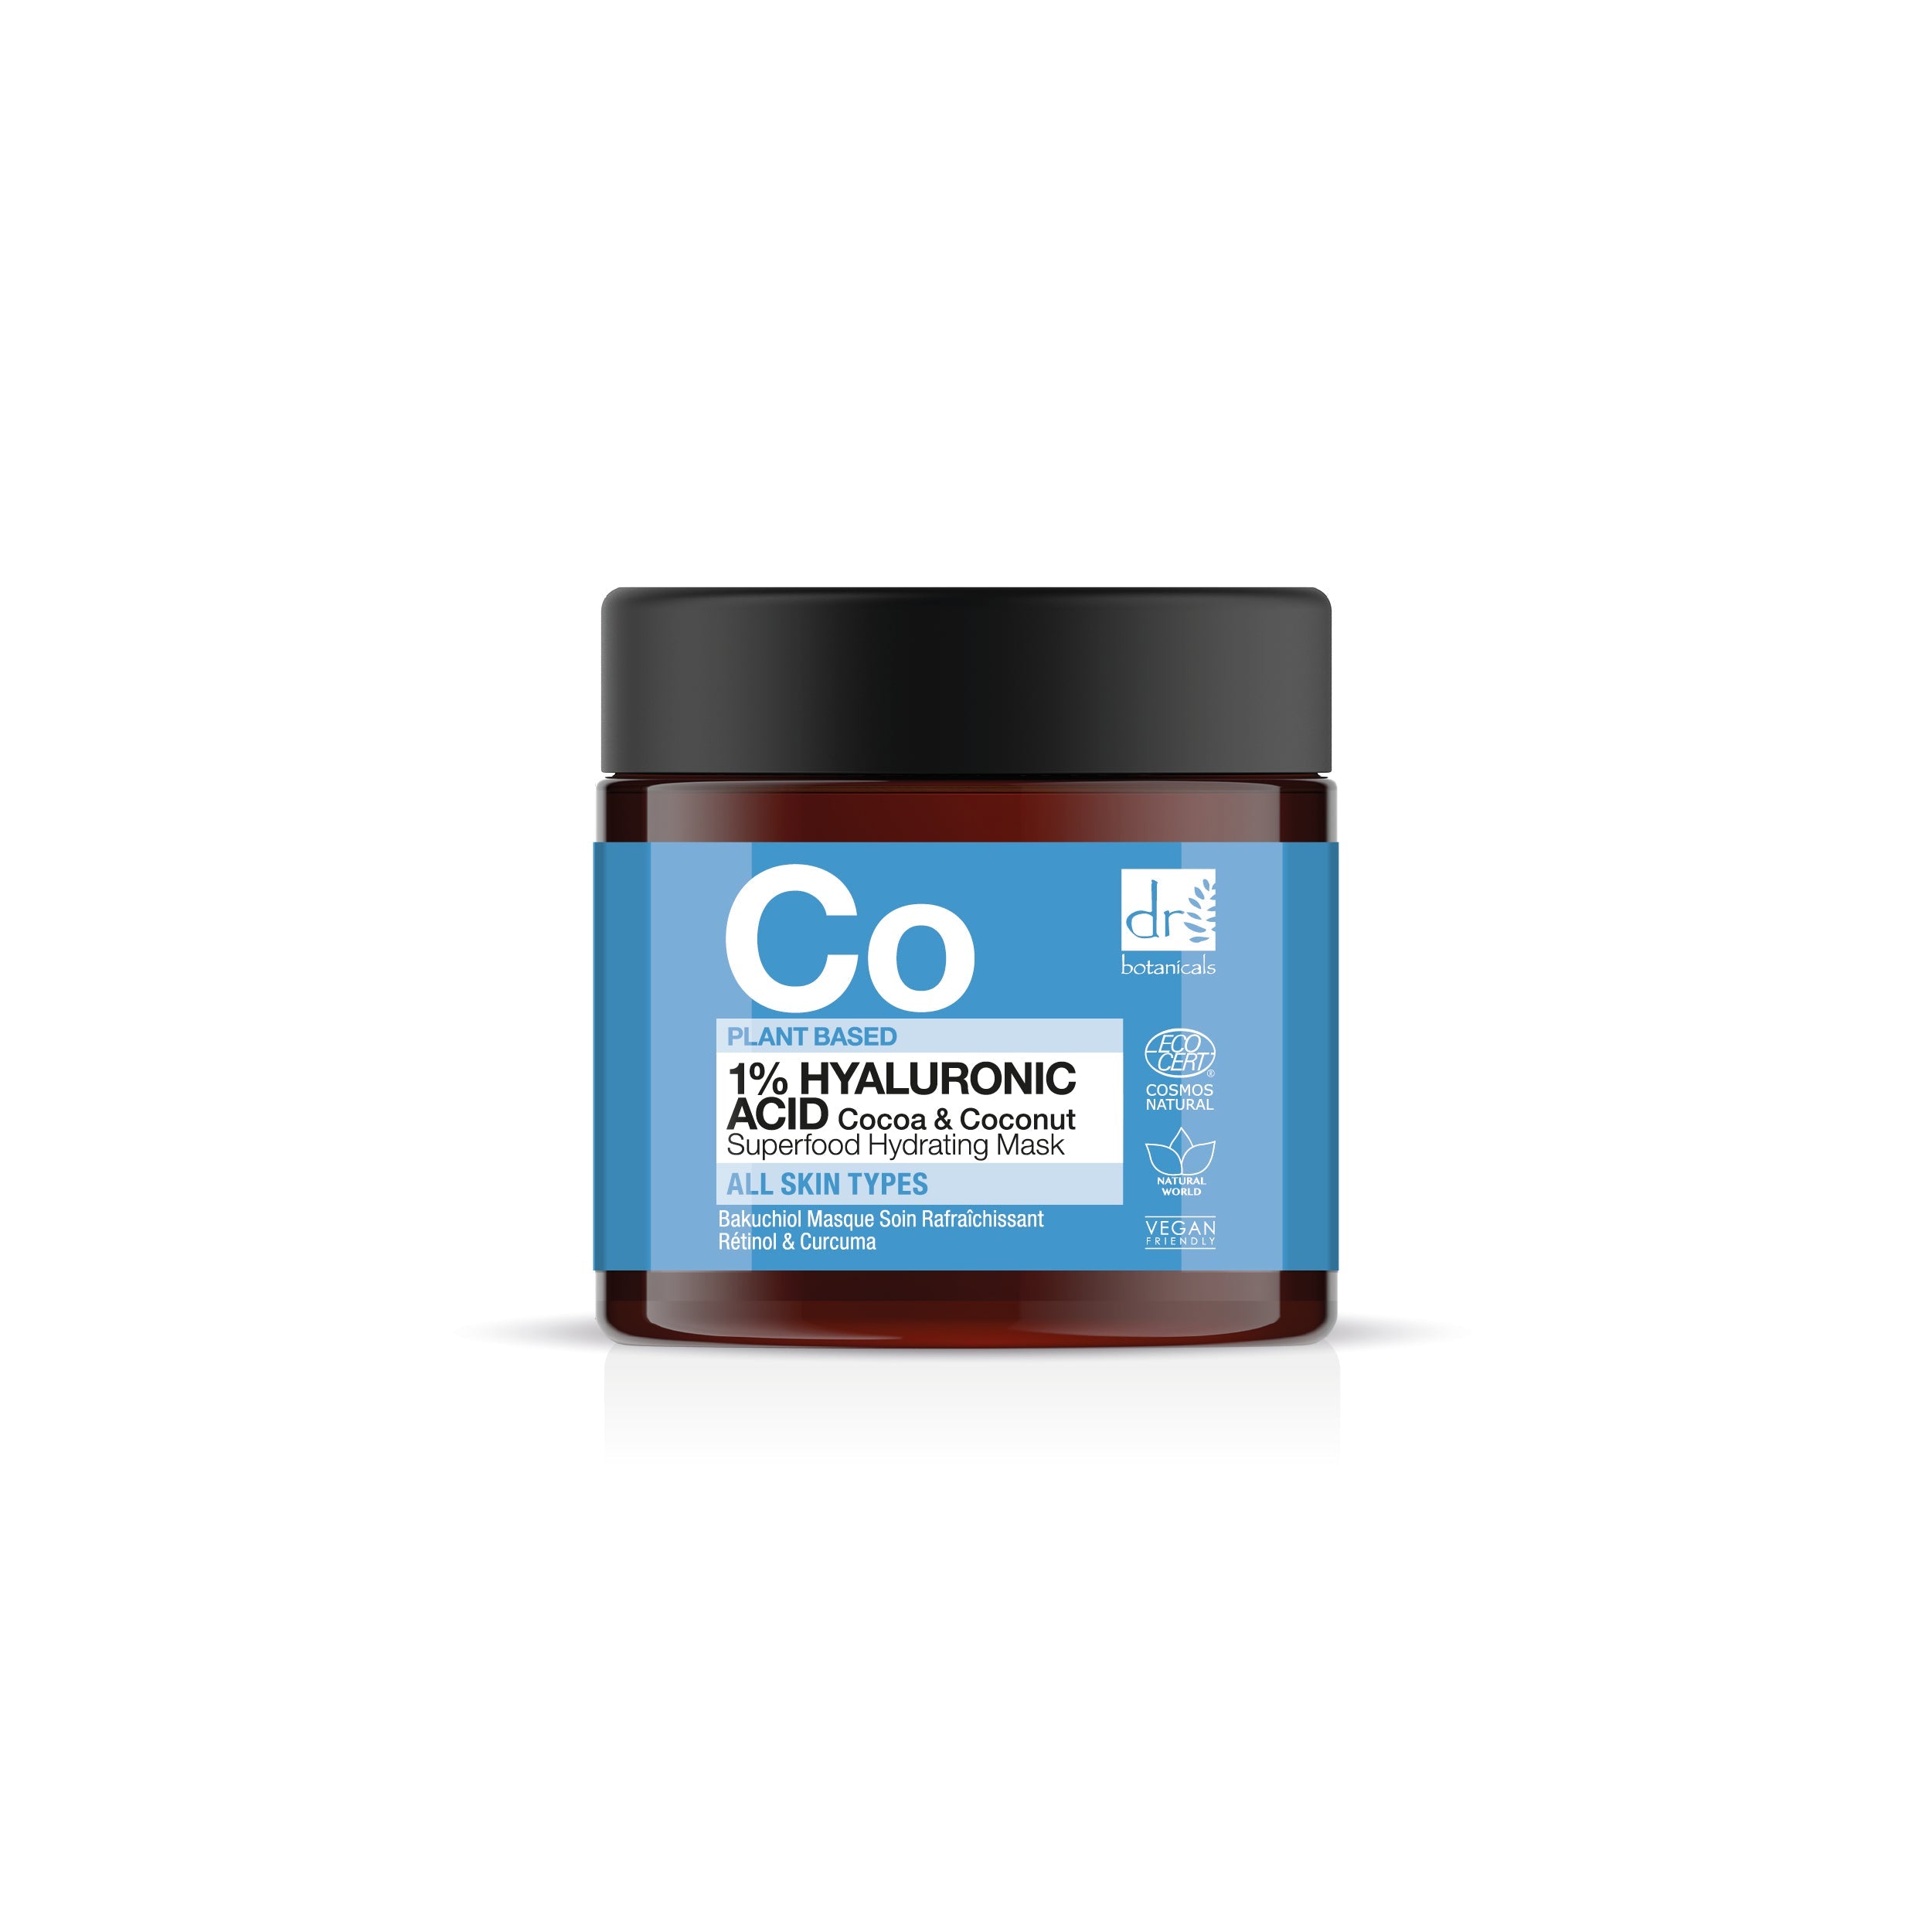 Hyaluronic Acid Cocoa & Coconut Superfood Hydrating Mask